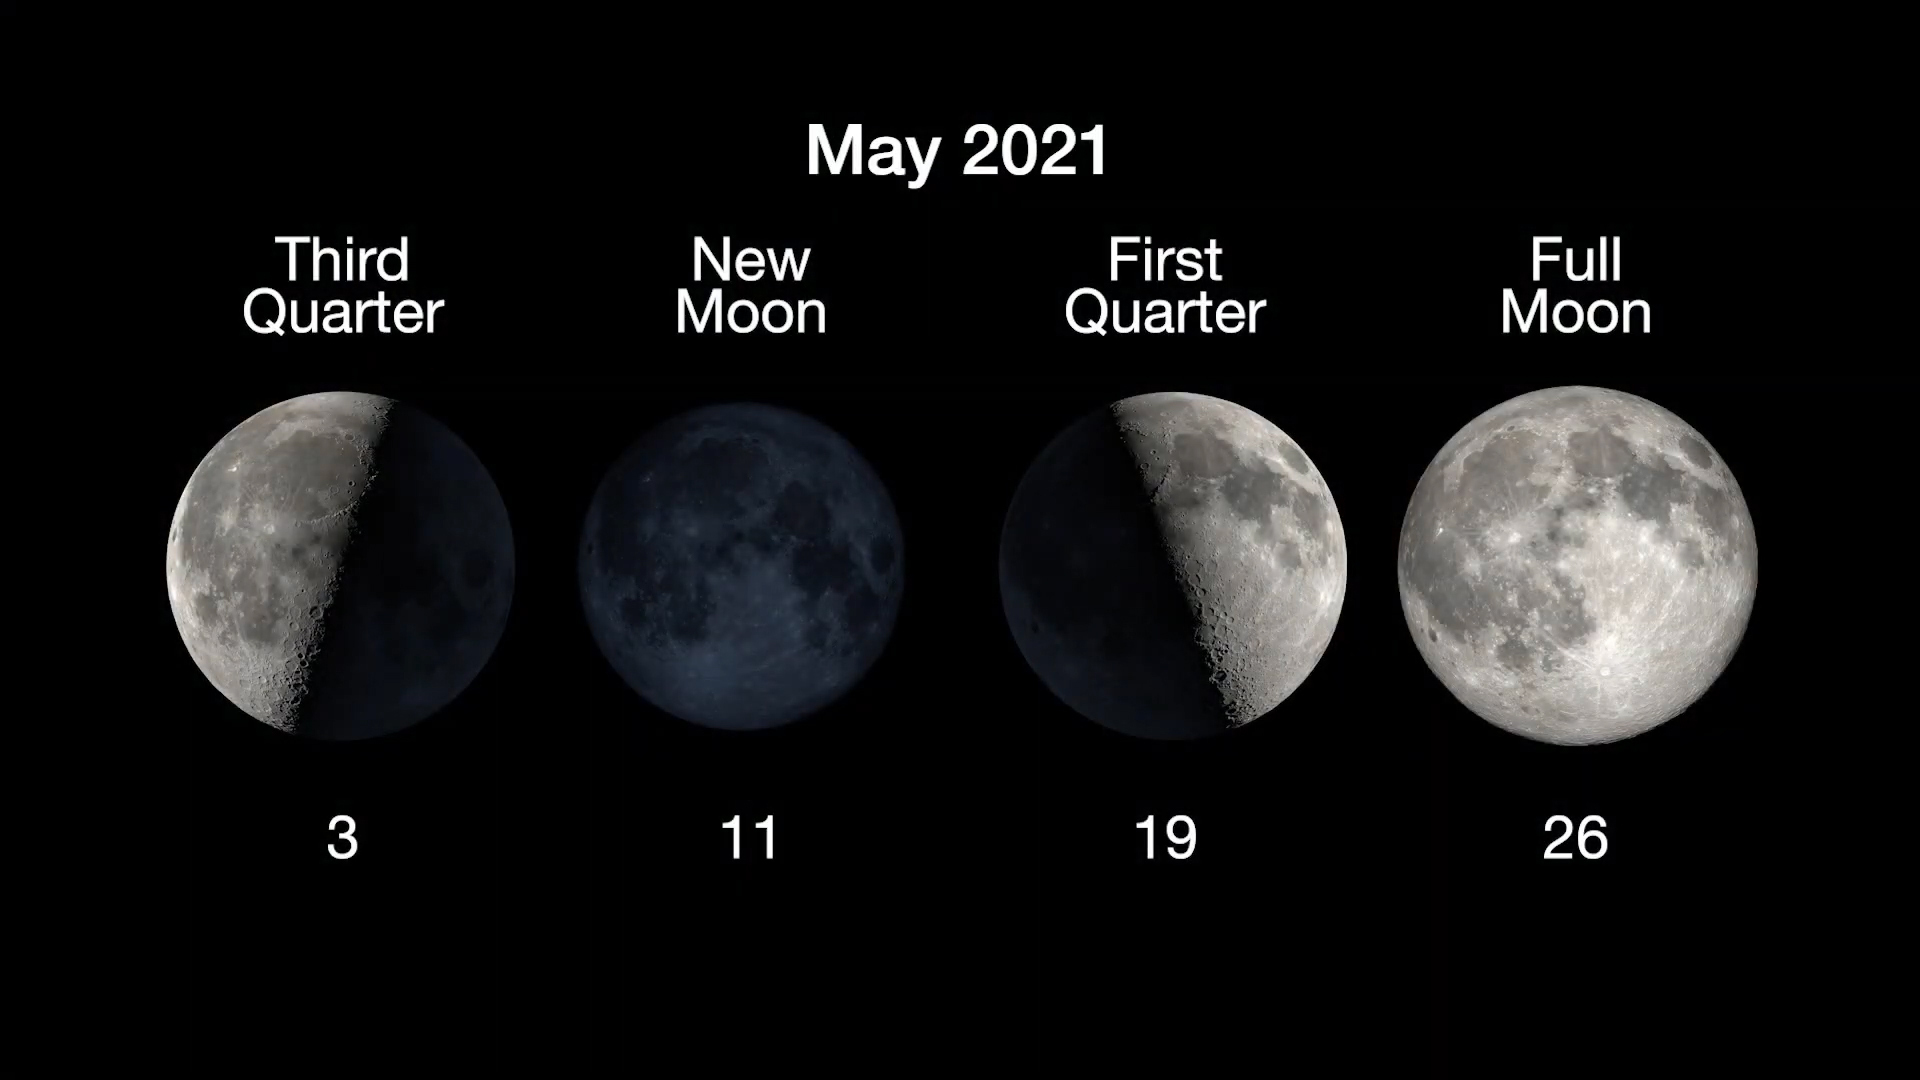 MoonPhases_May2021.jpg